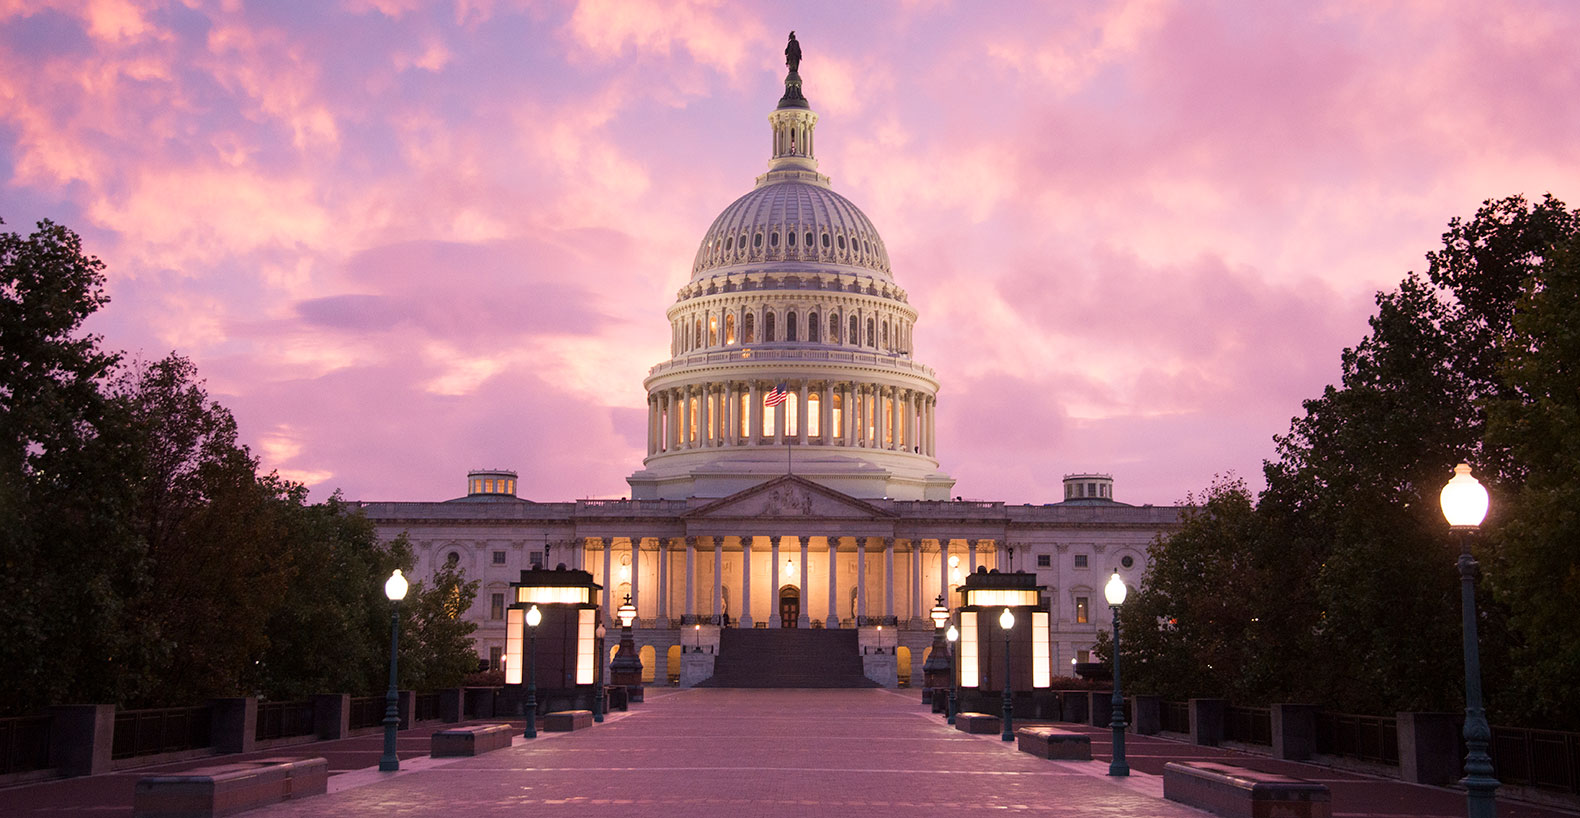 Capitol with pink sky